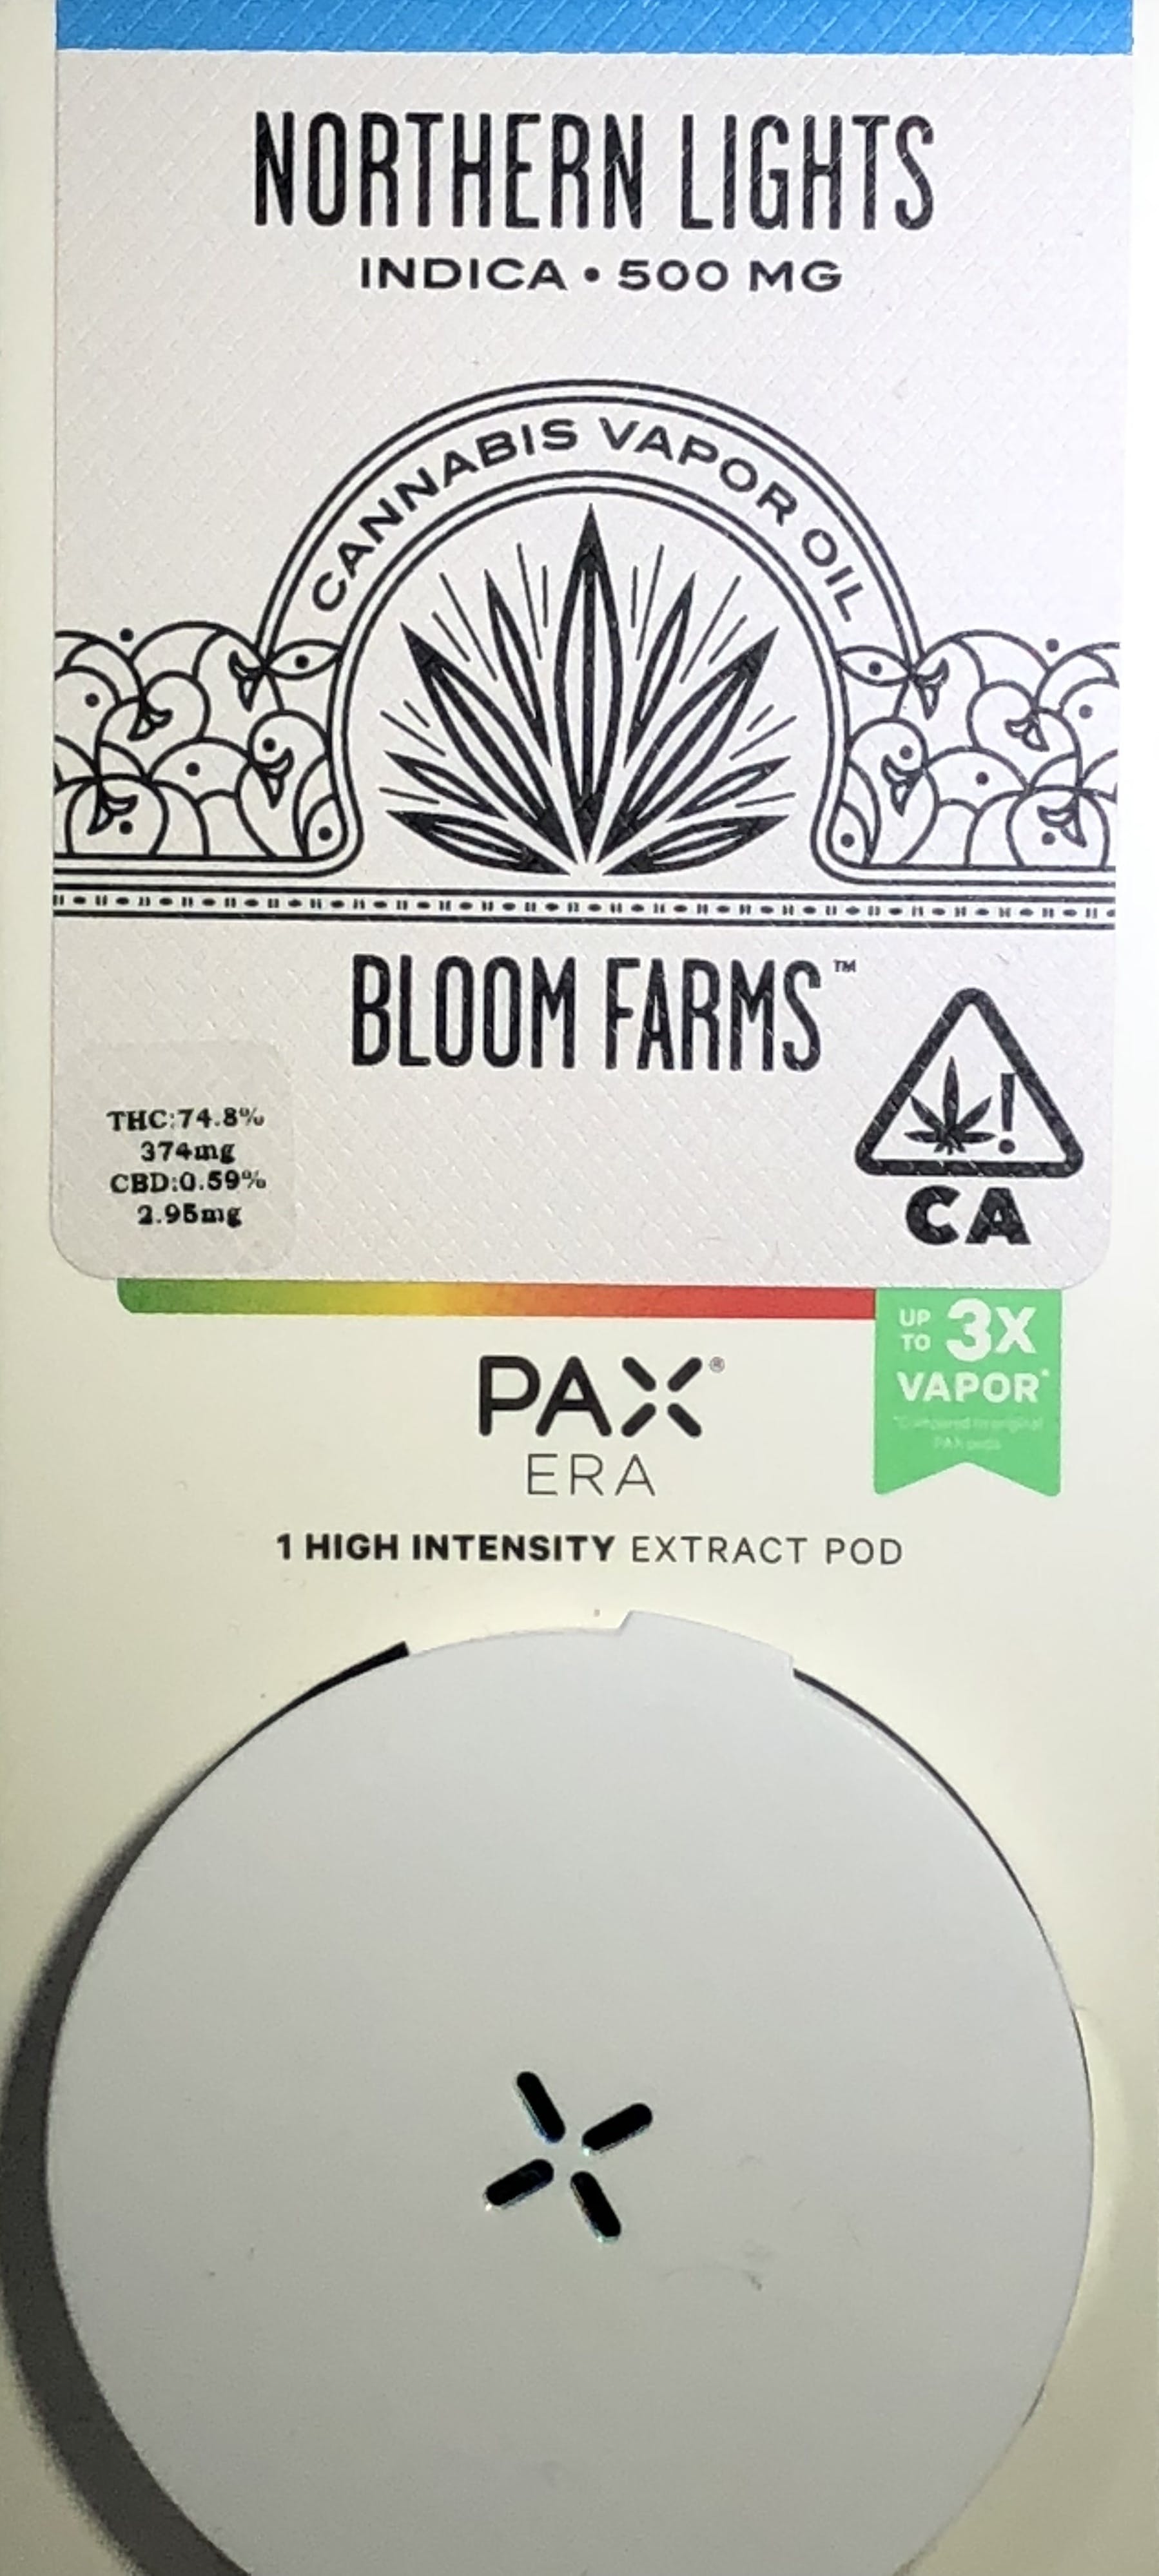 concentrate-bloom-farm-northern-lights-cartridges